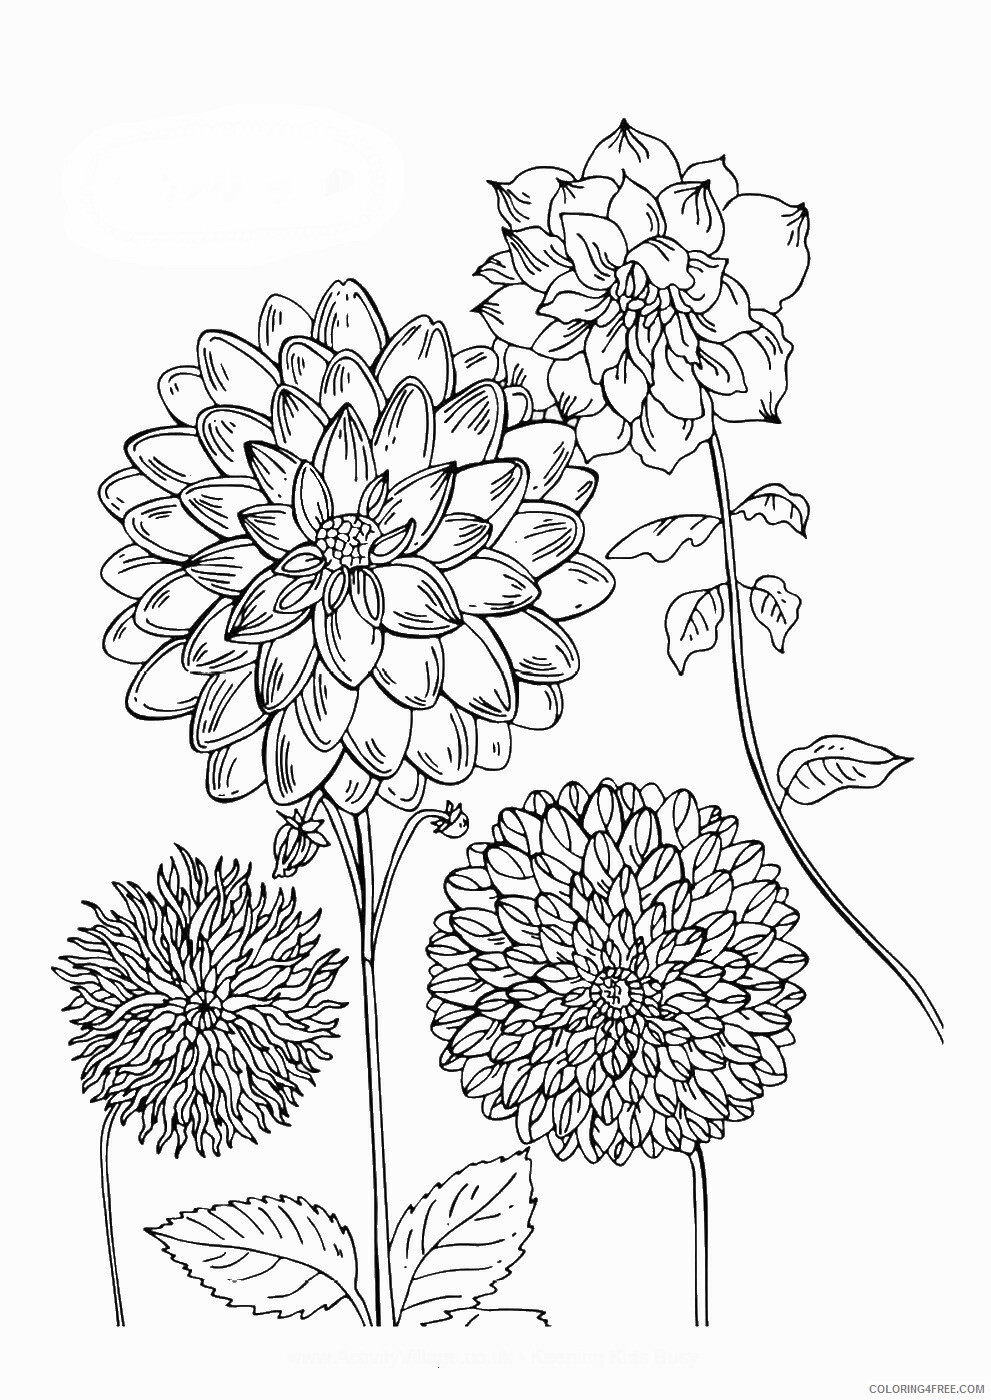 Printable Flower Coloring Pages Flowers Nature flowerc122 Printable 2021 374 Coloring4free